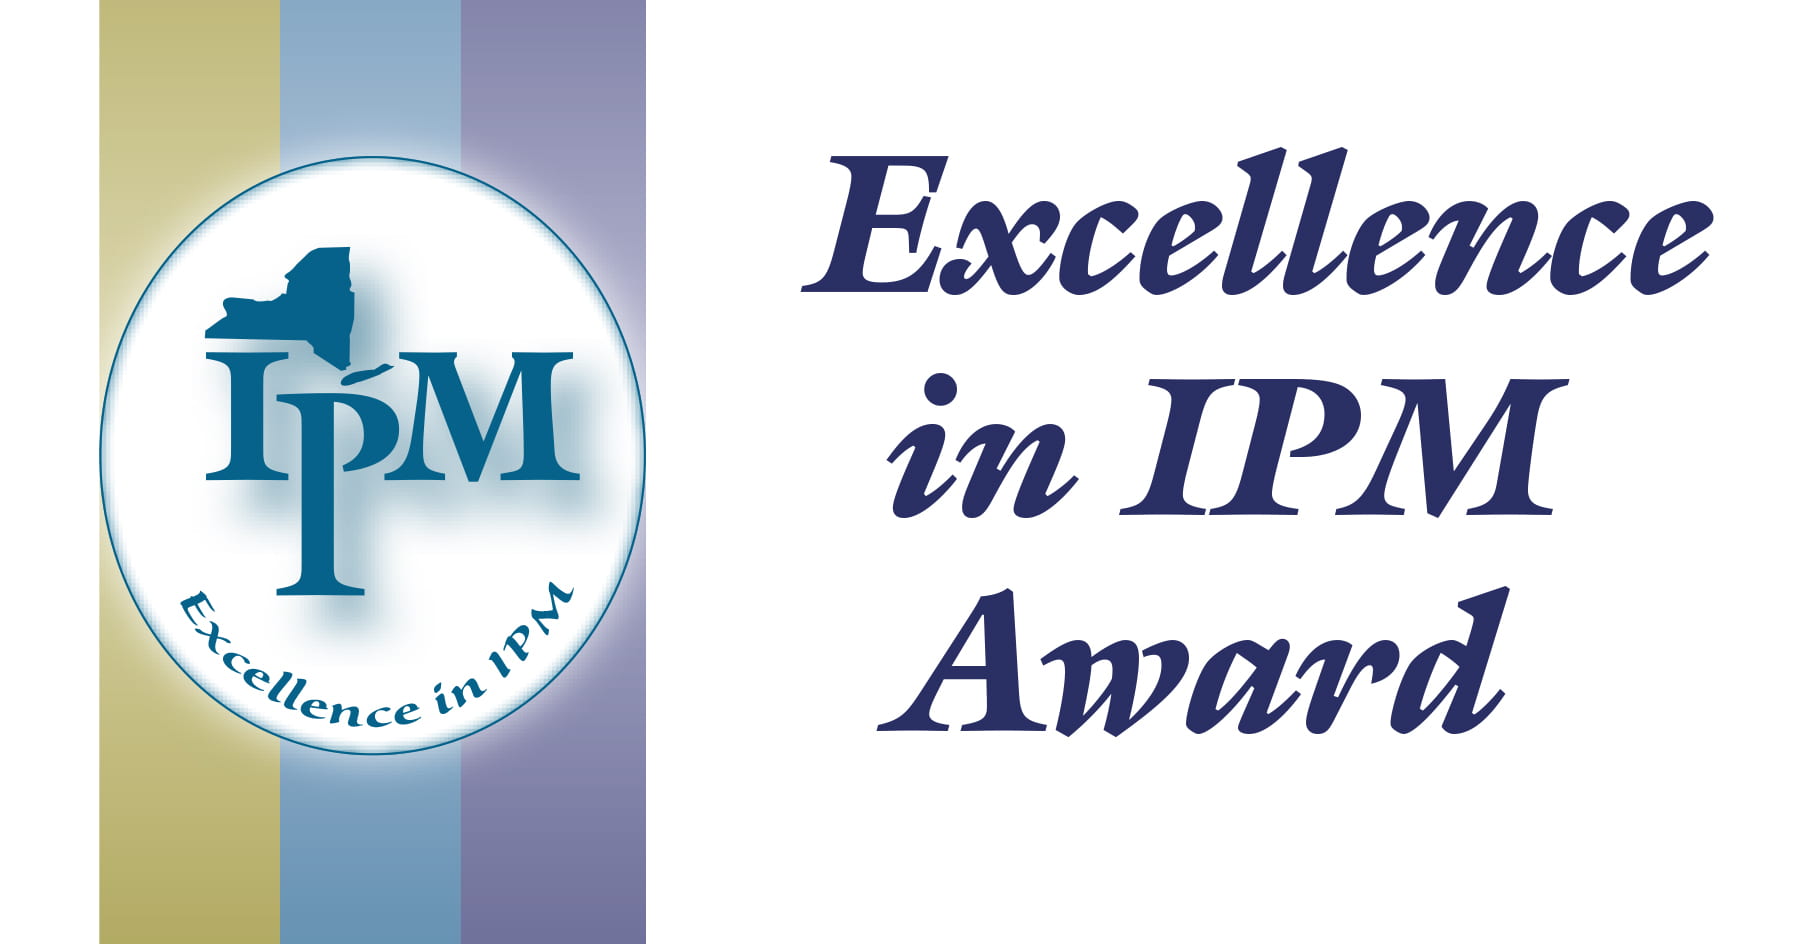 This graphic is a replica image of the Excellence in IPM Award plaque given awardees.